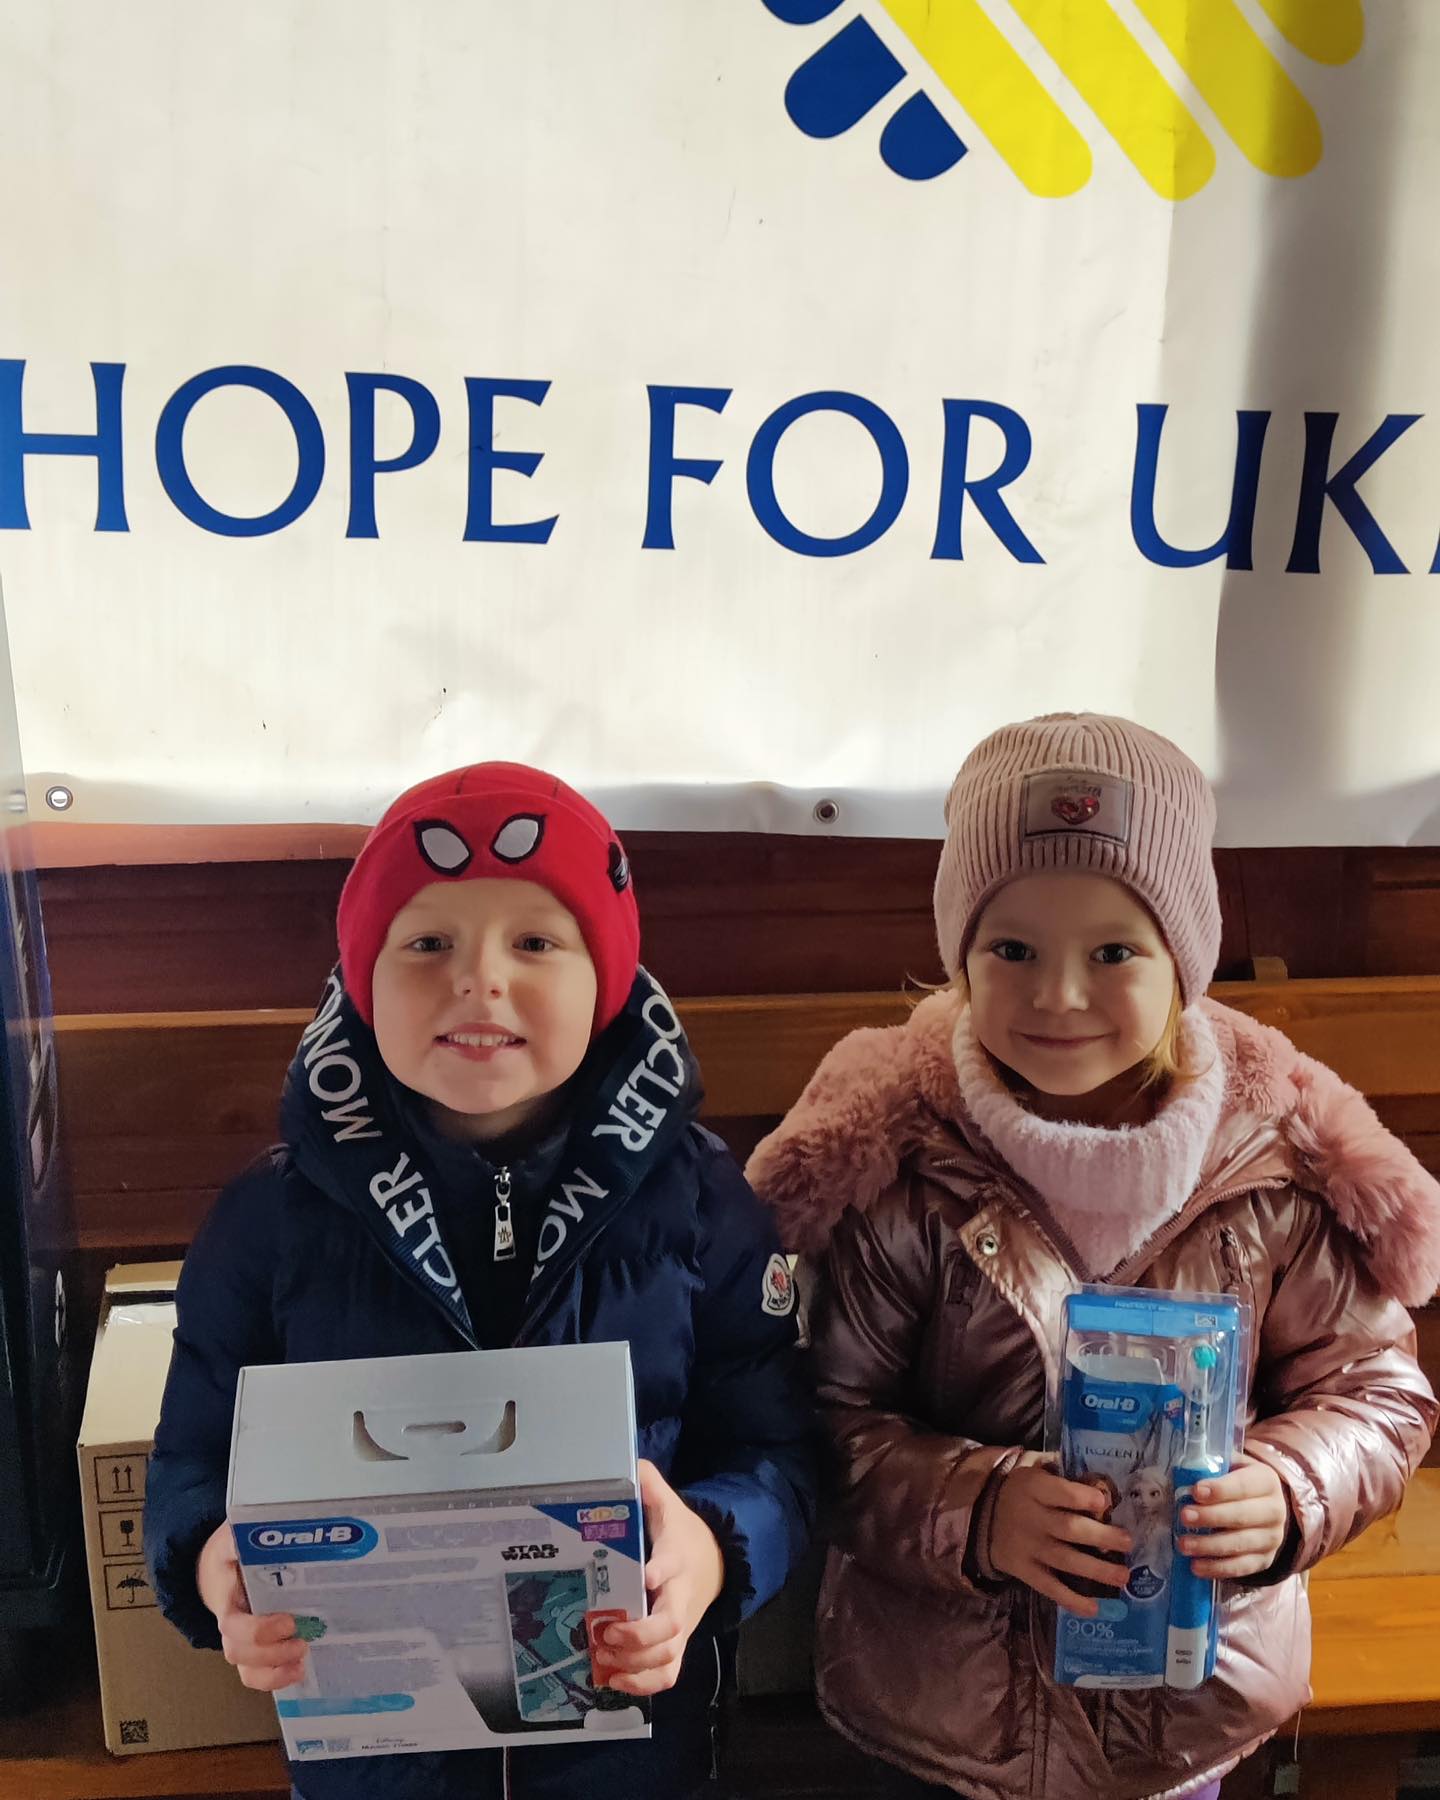 Two children standing next to a sign that says hope for ukraine.